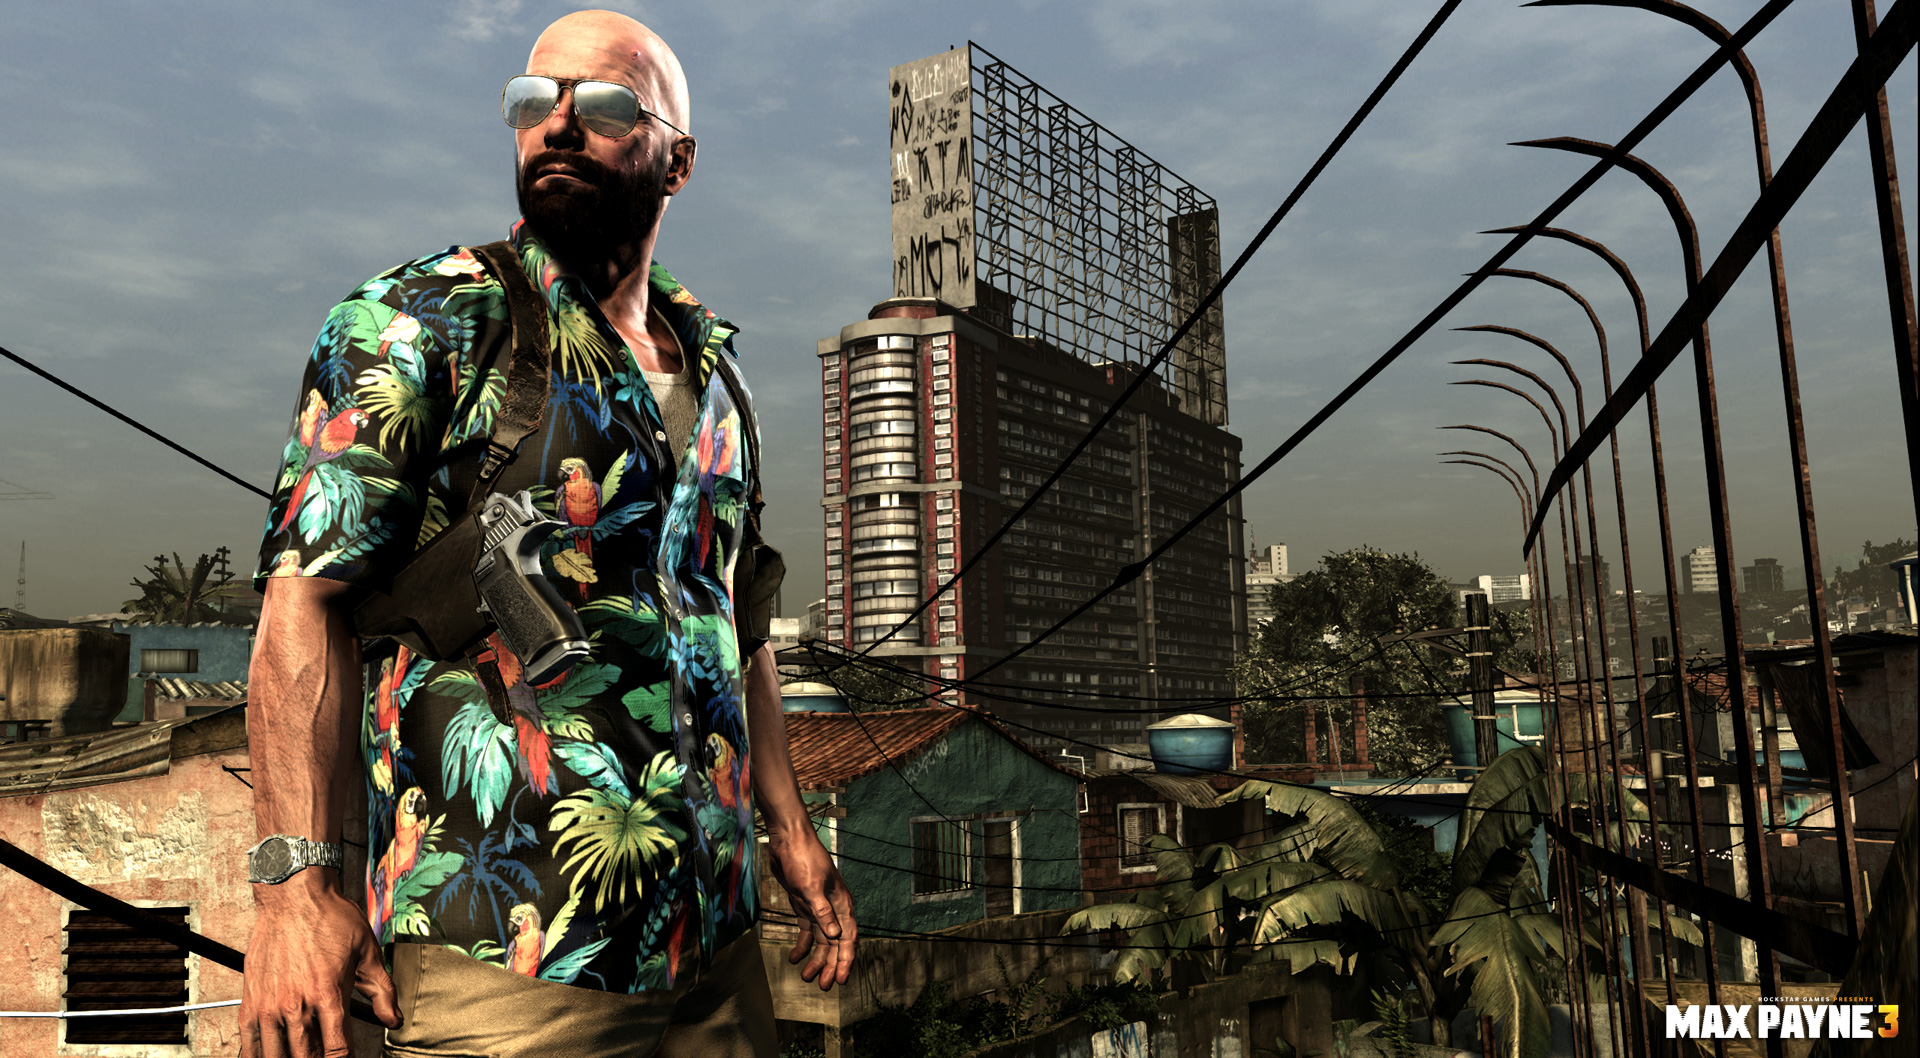 New Screenshots of Max Payne 3 for PC Released